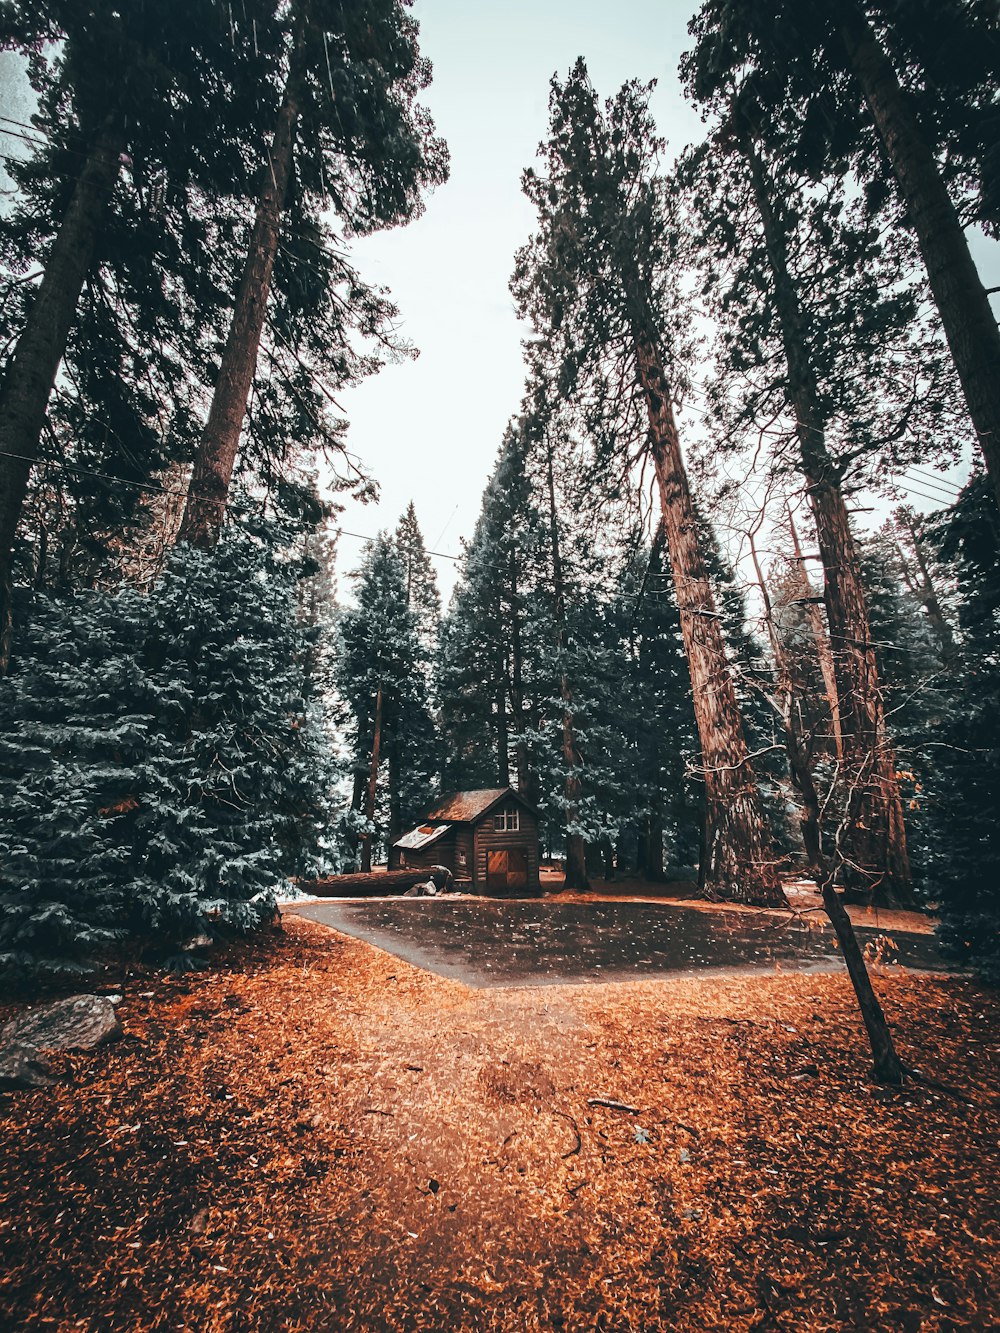 brown wooden house in the middle of the forest during daytime